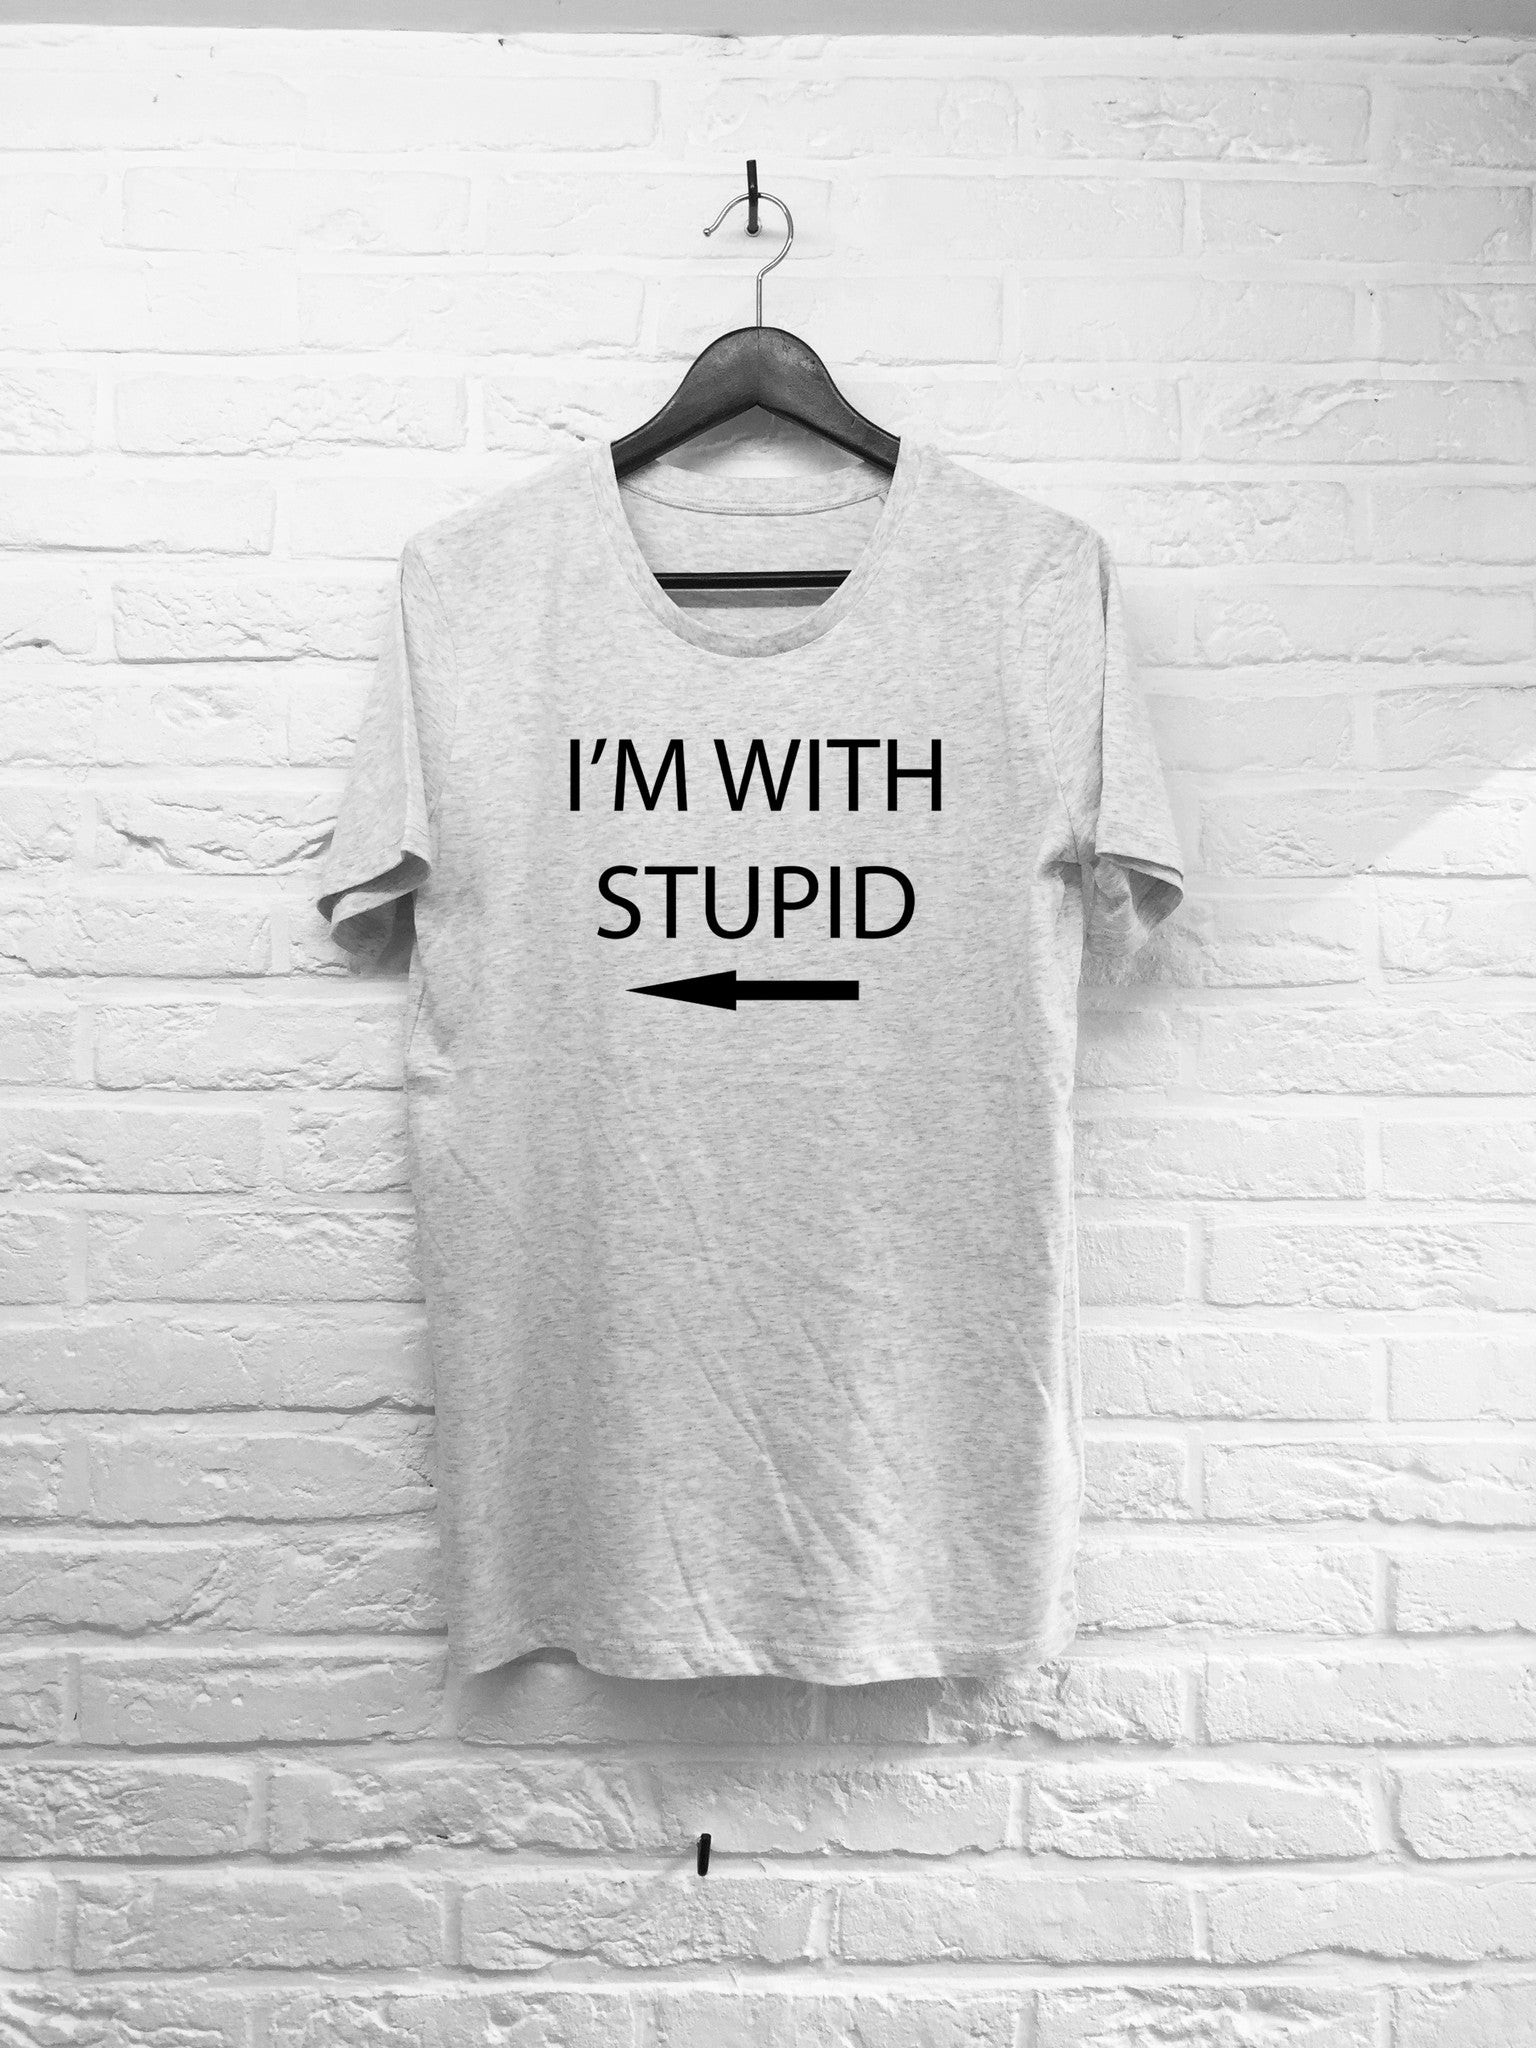 I'm with stupid-T shirt-Atelier Amelot